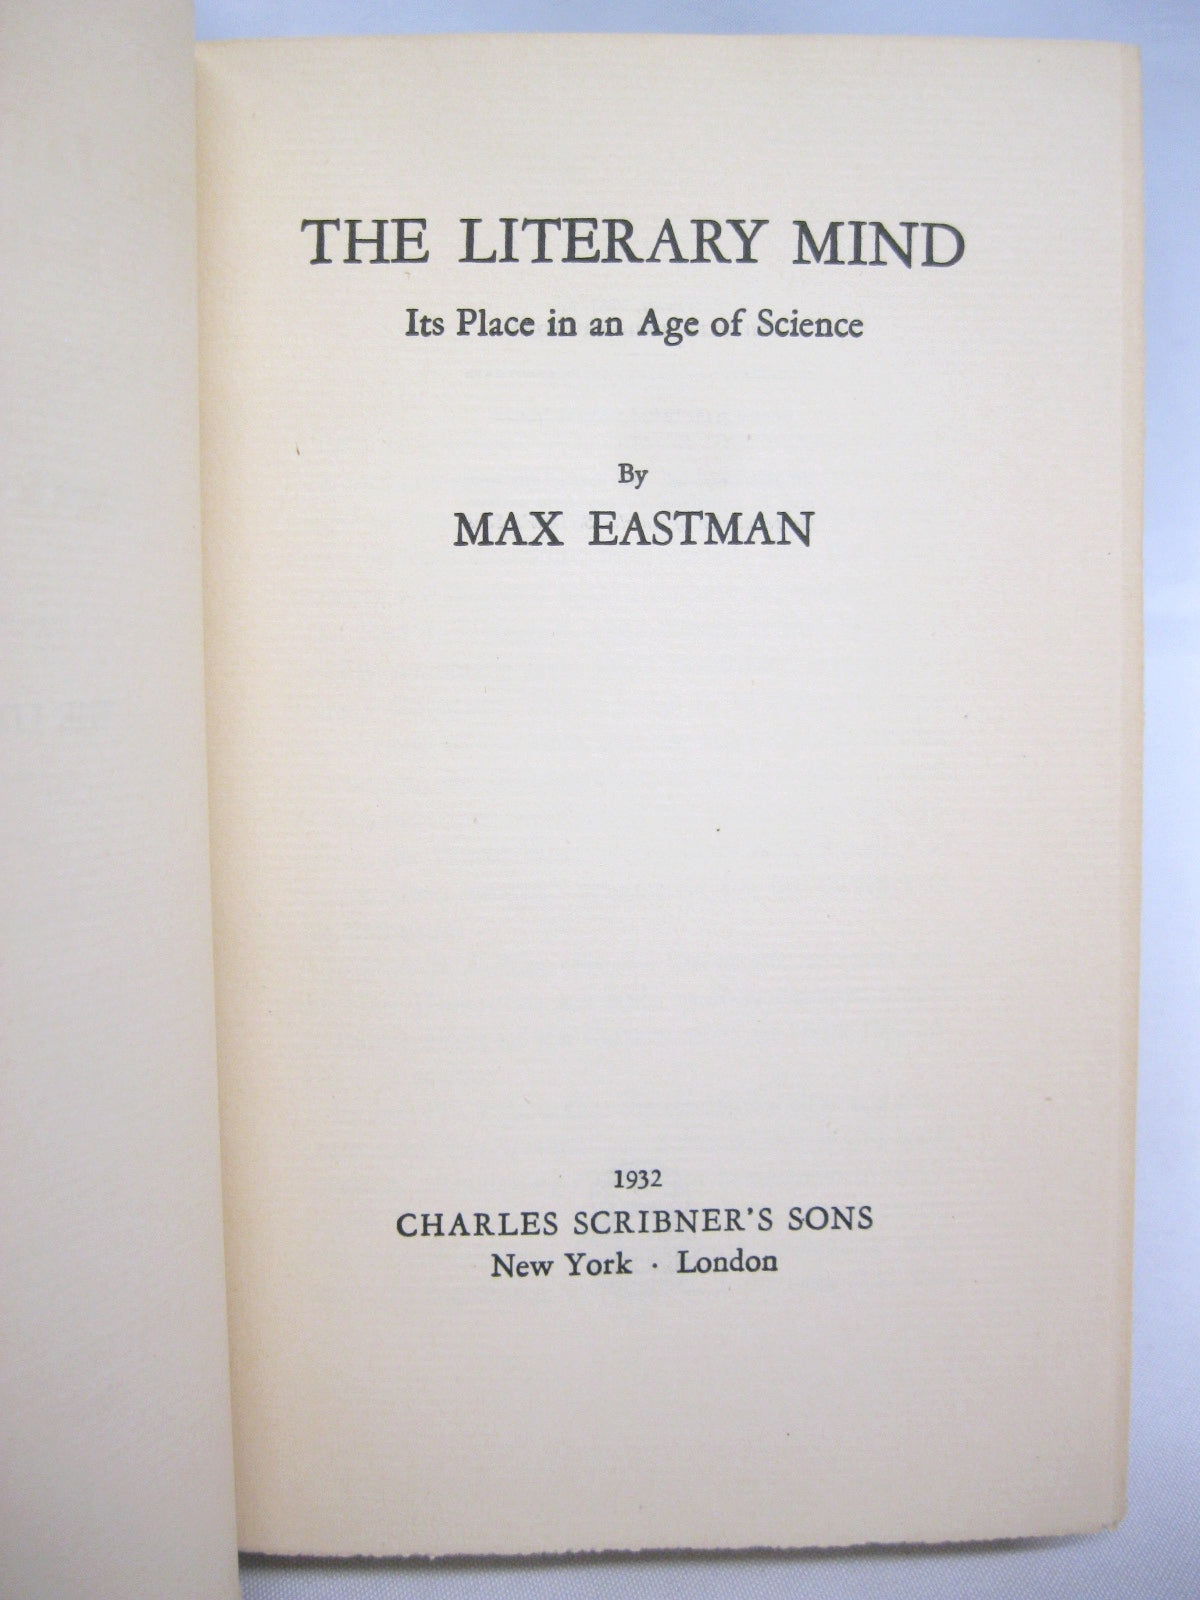 The Literary Mind by Max Eastman